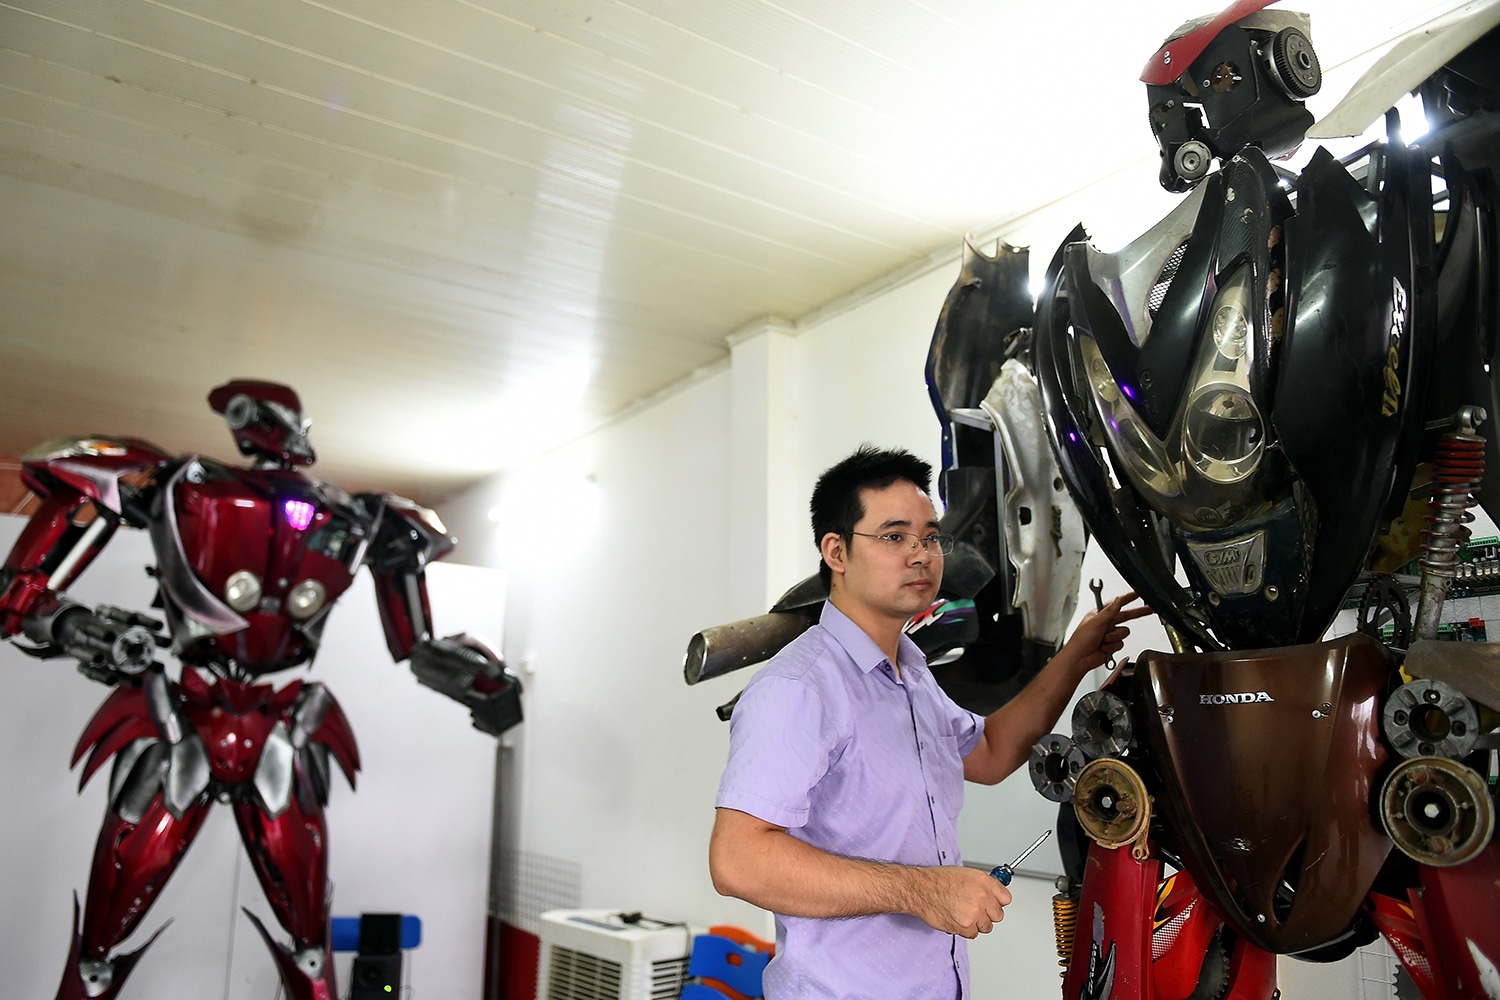 A new robot-model next to “Robot-One”, made from spare motorcycle parts, at a workshop in Hanoi.A new robot-model next to “Robot-One”, made from spare motorcycle parts, at a workshop in Hanoi.